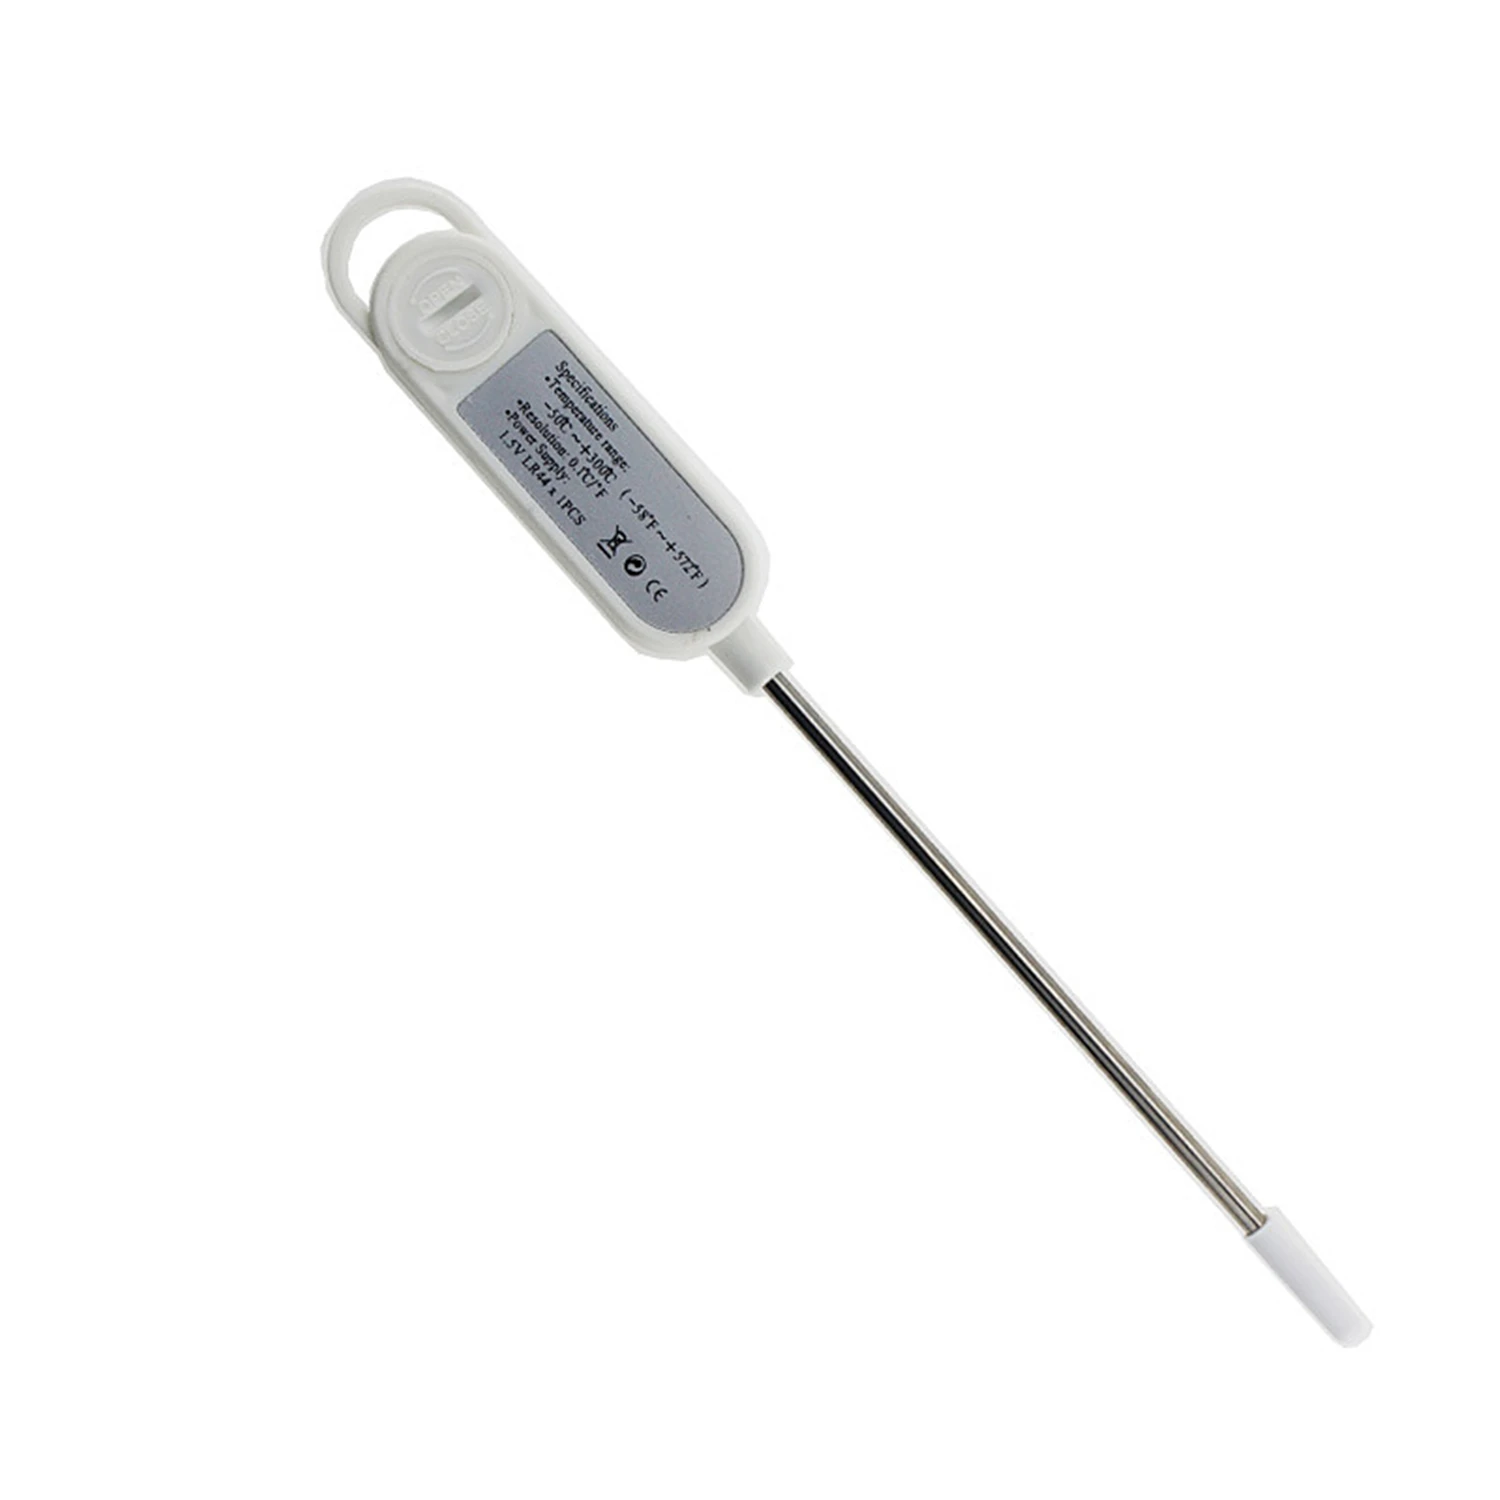 TP-300 digital food thermometer with real-time reading probe can be used for BBQ, meat, liquid, cooking temperature measurement